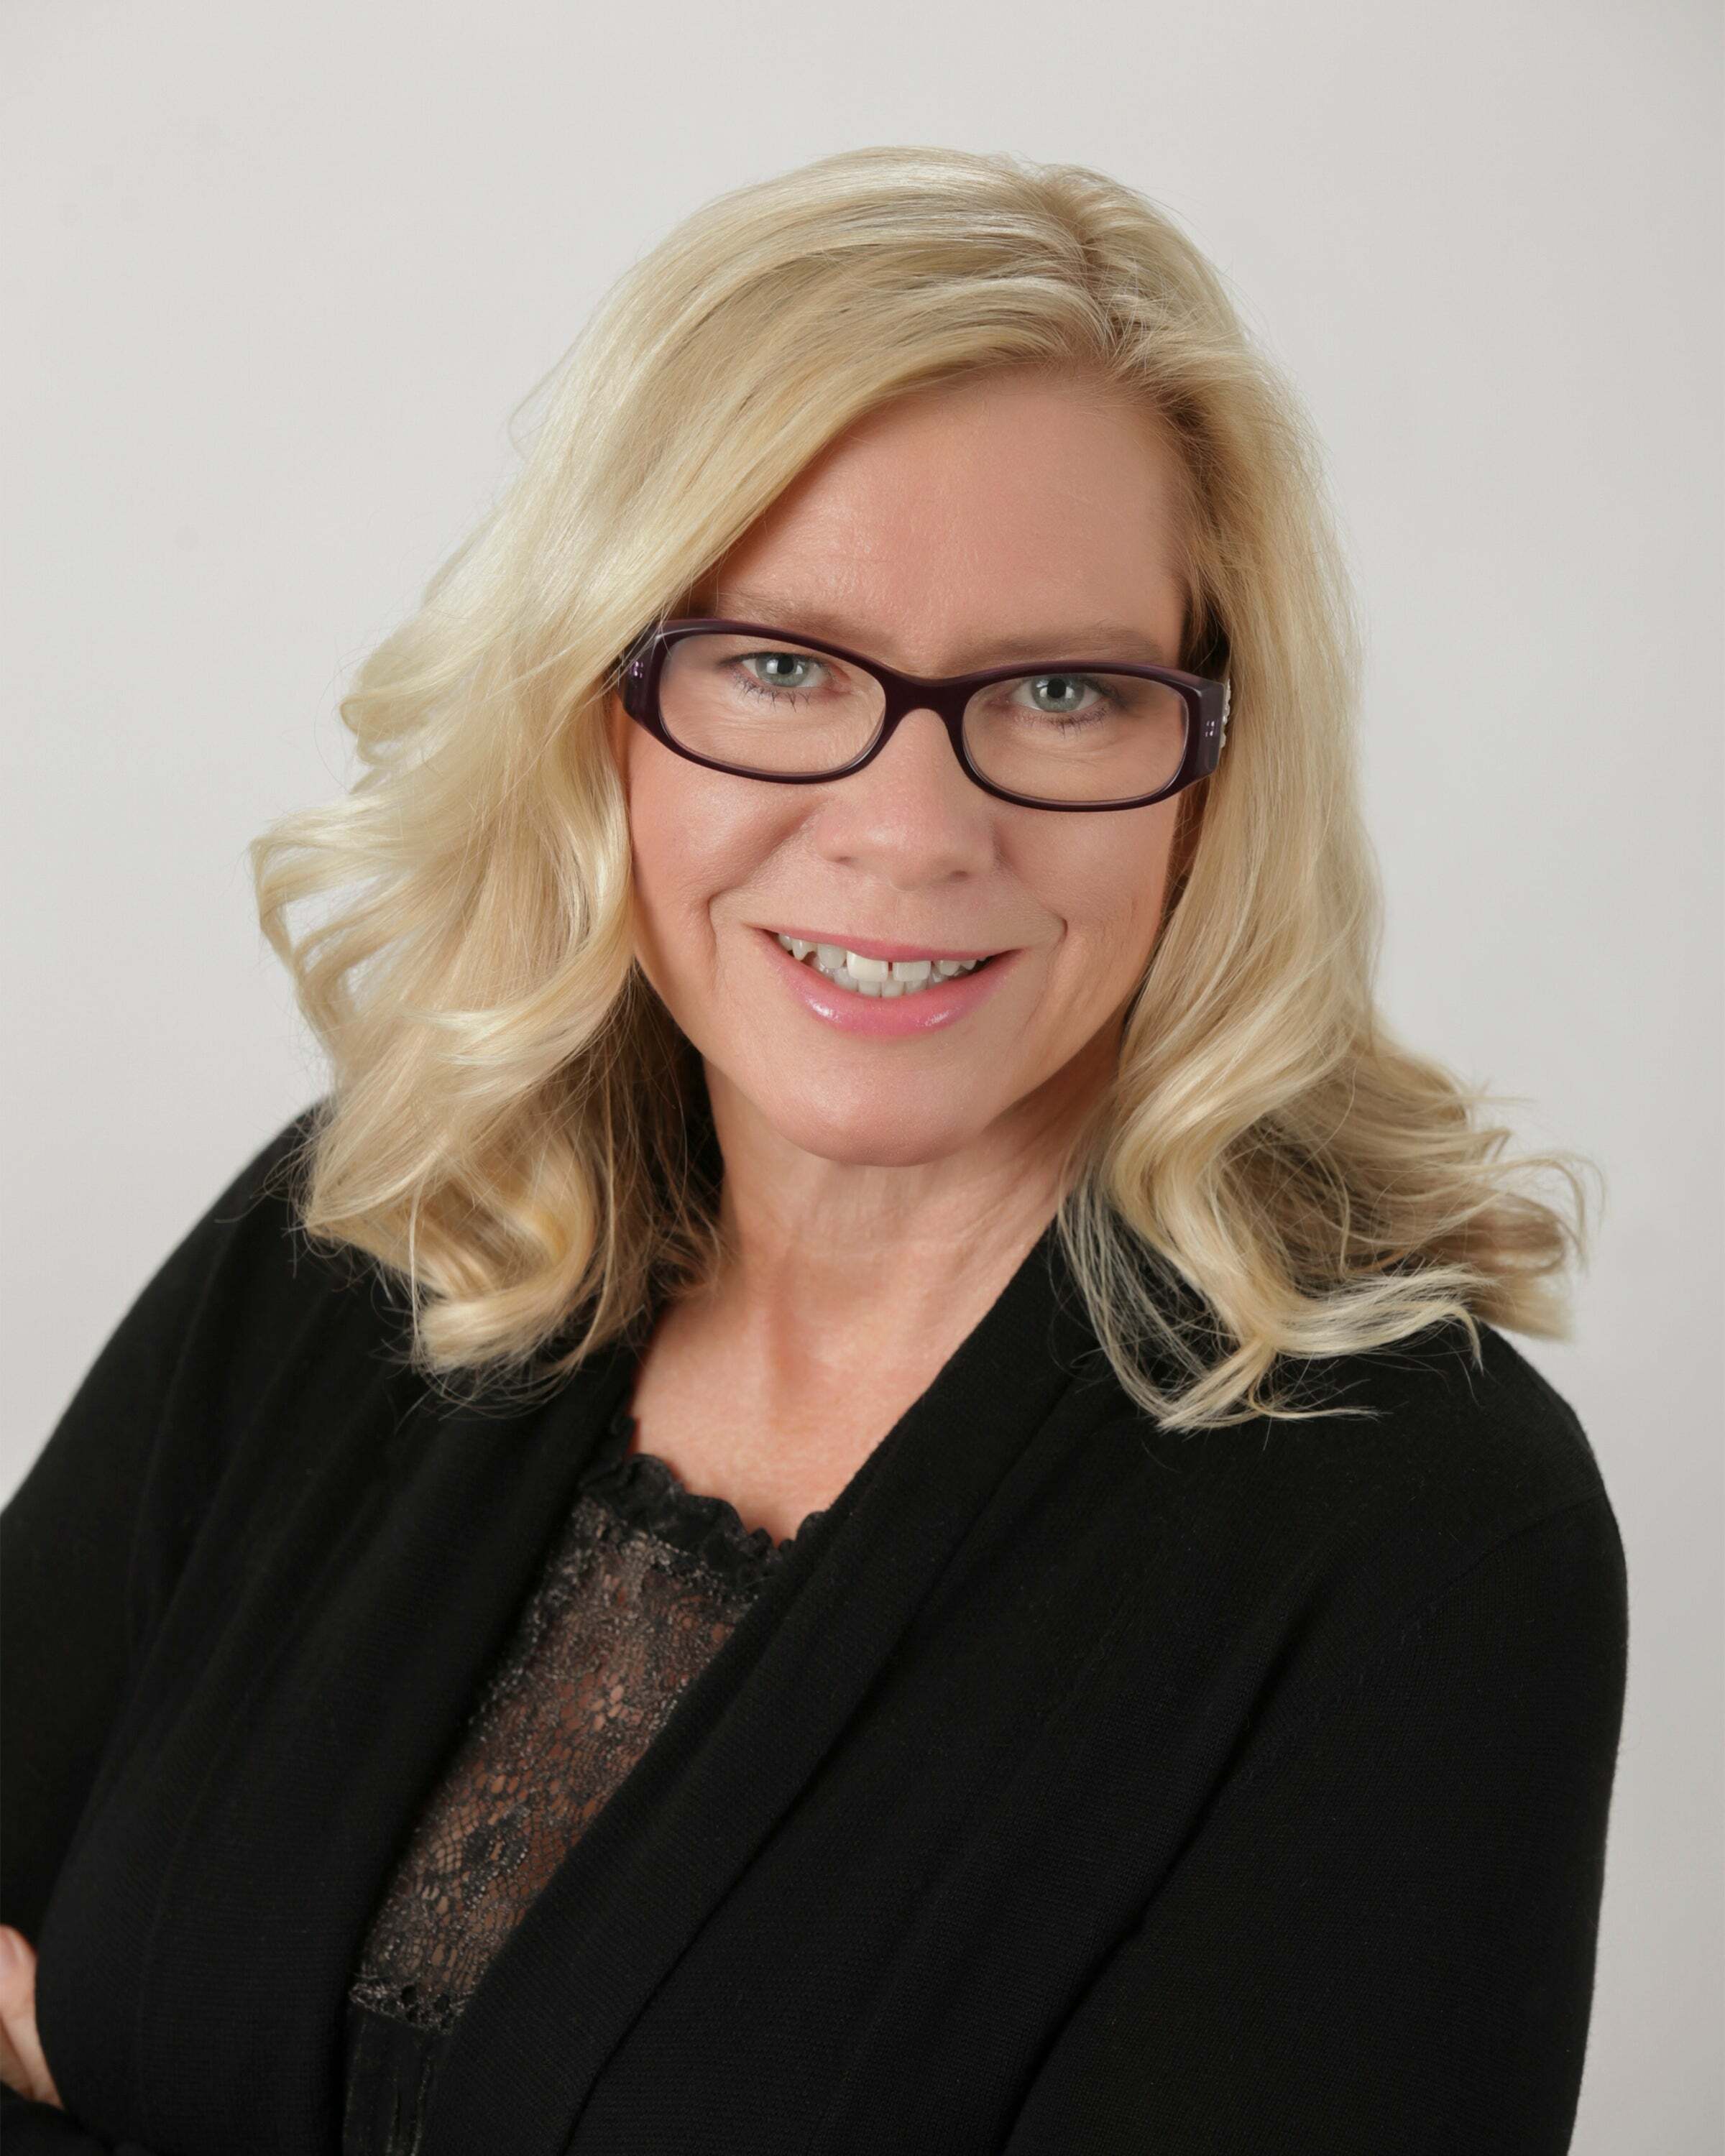 Cathy Christiansen, Real Estate Salesperson in Roseville, Reliance Partners